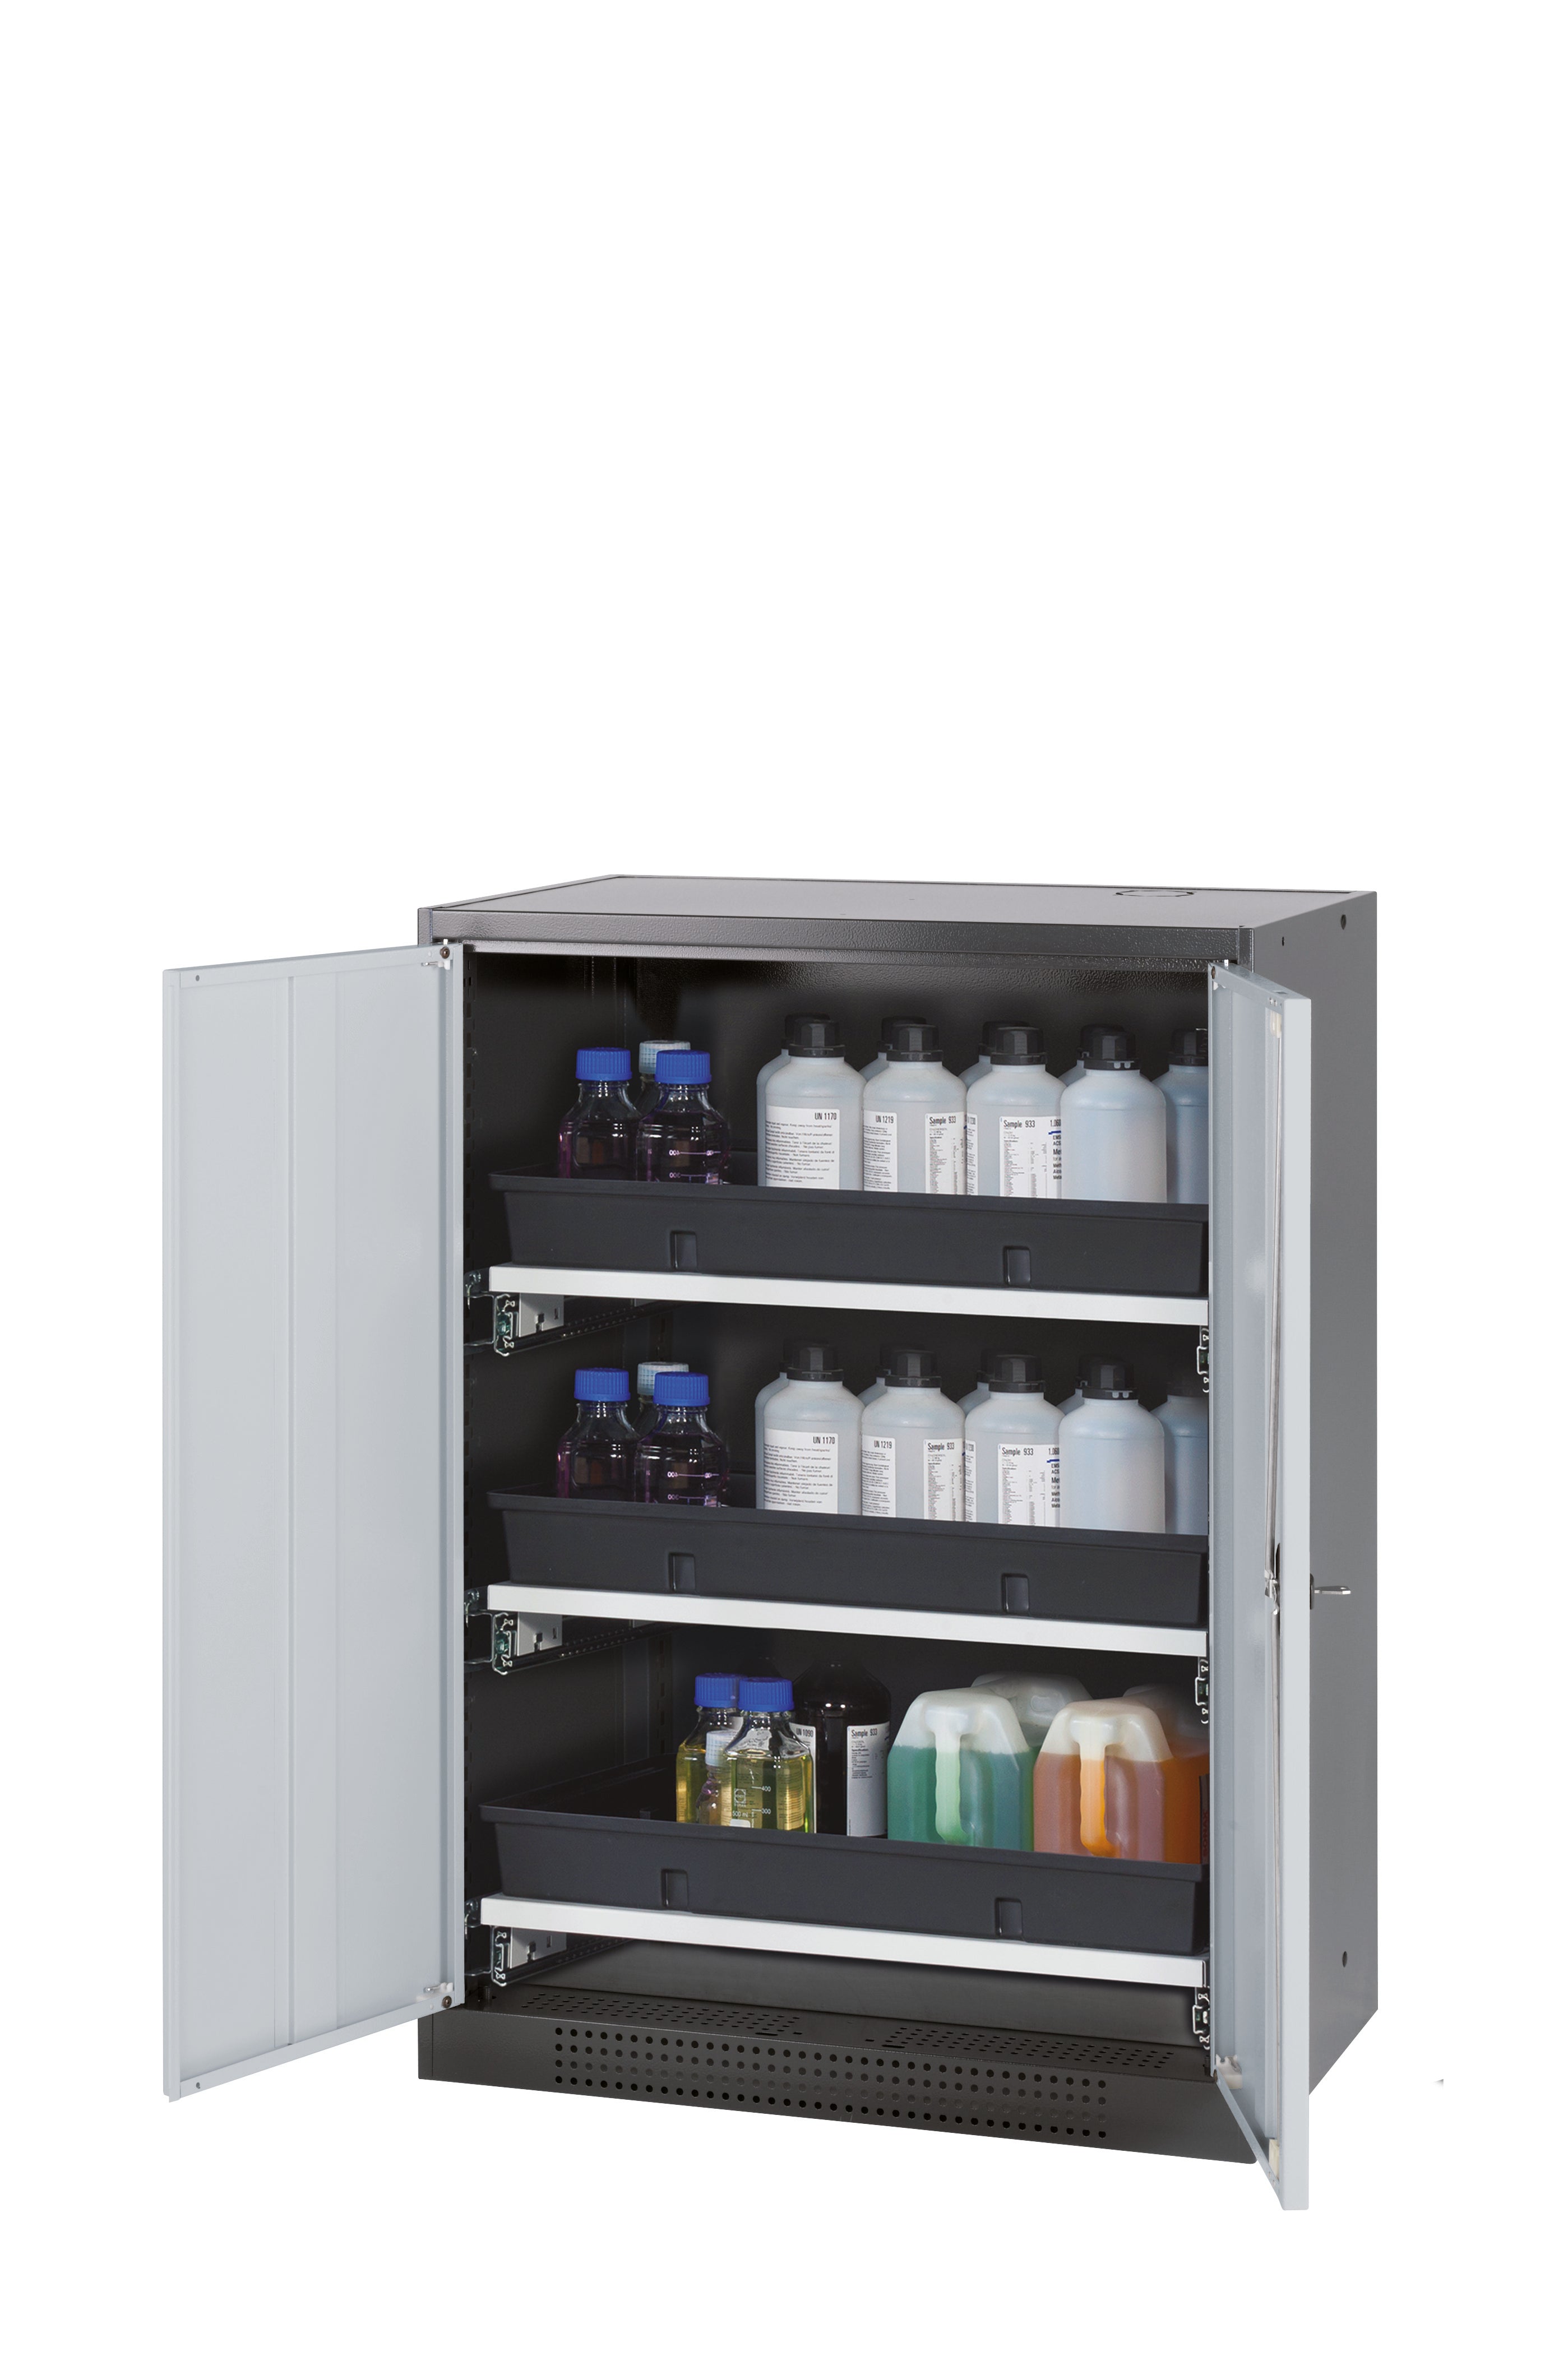 Chemical cabinet CS-CLASSIC model CS.110.081 in light gray RAL 7035 with 3x AbZ pull-out shelves (sheet steel/polypropylene)